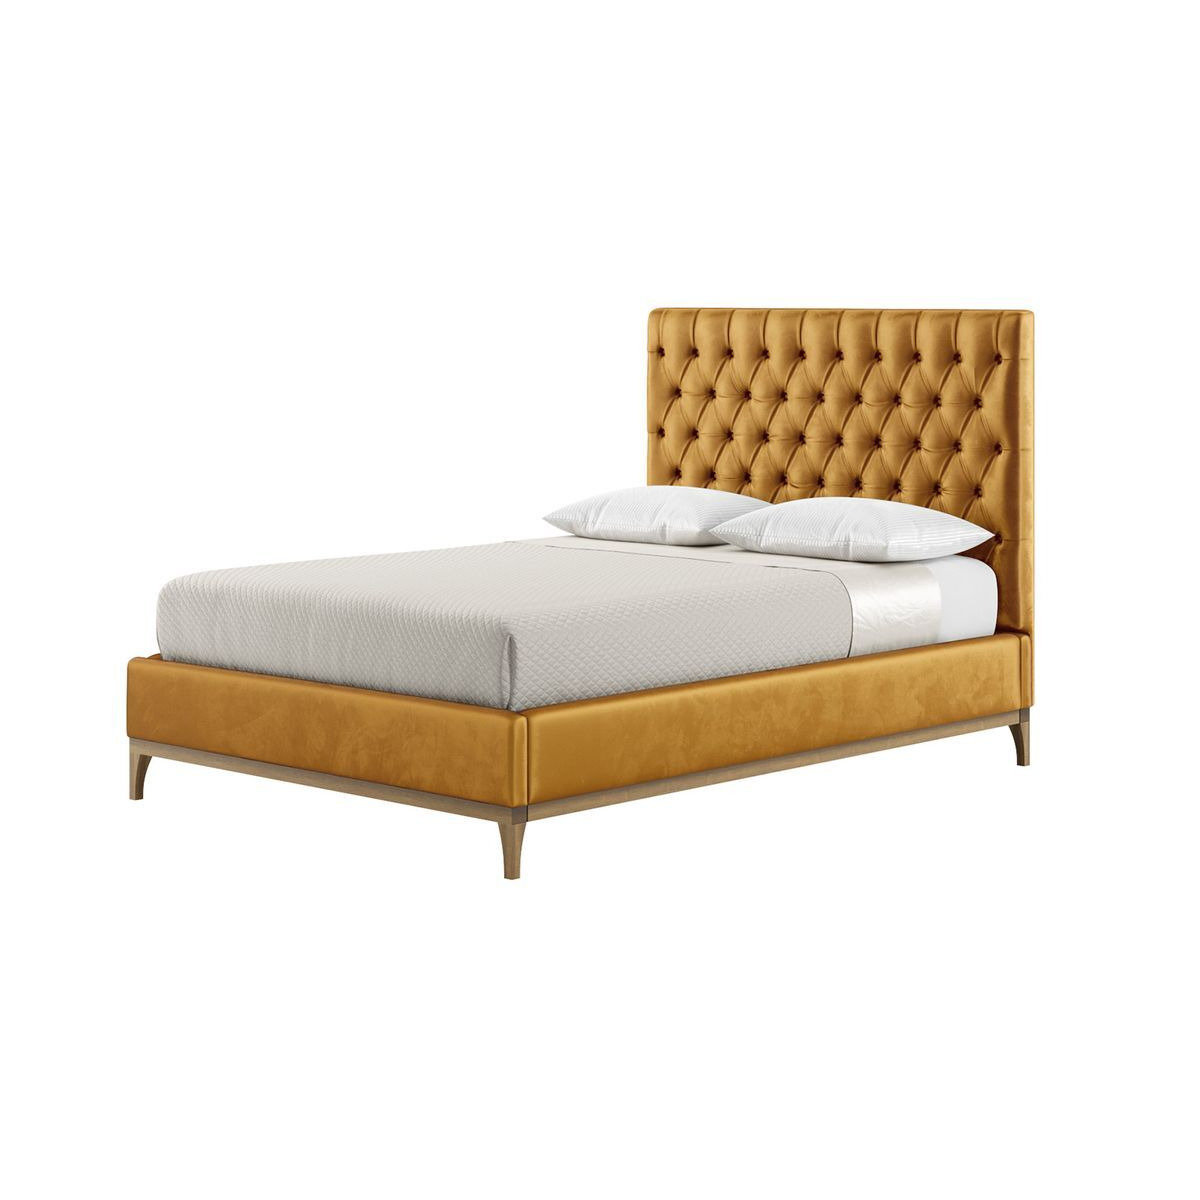 Marlon 4ft6 Double Bed Frame with luxury deep button quilted headboard, mustard, Leg colour: wax black - image 1